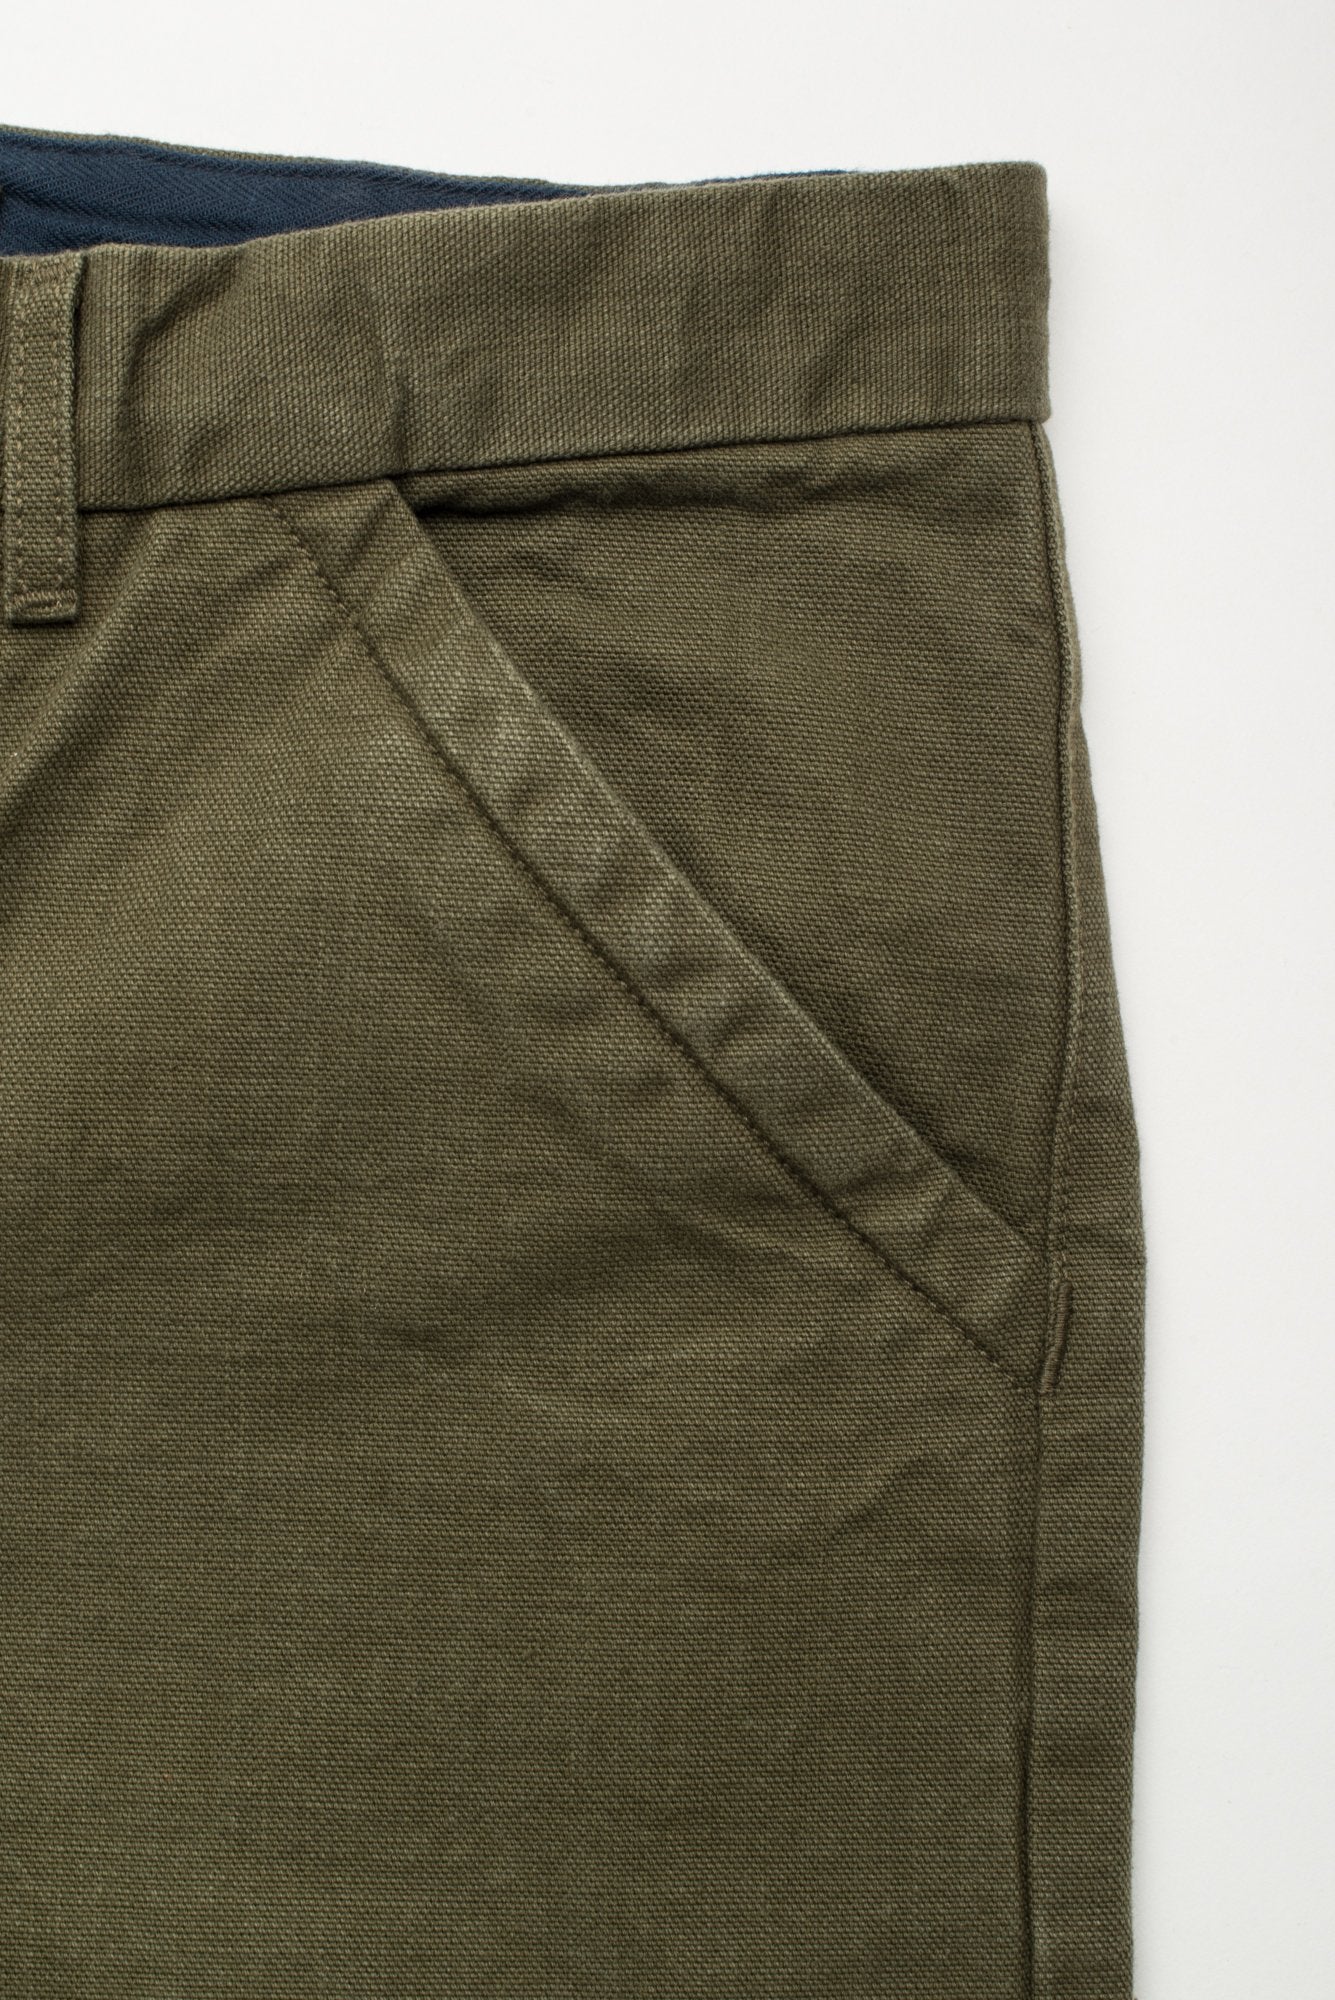 Freenote Cloth Workers Chino Slim Fit in 14 Ounce Slub Army Green